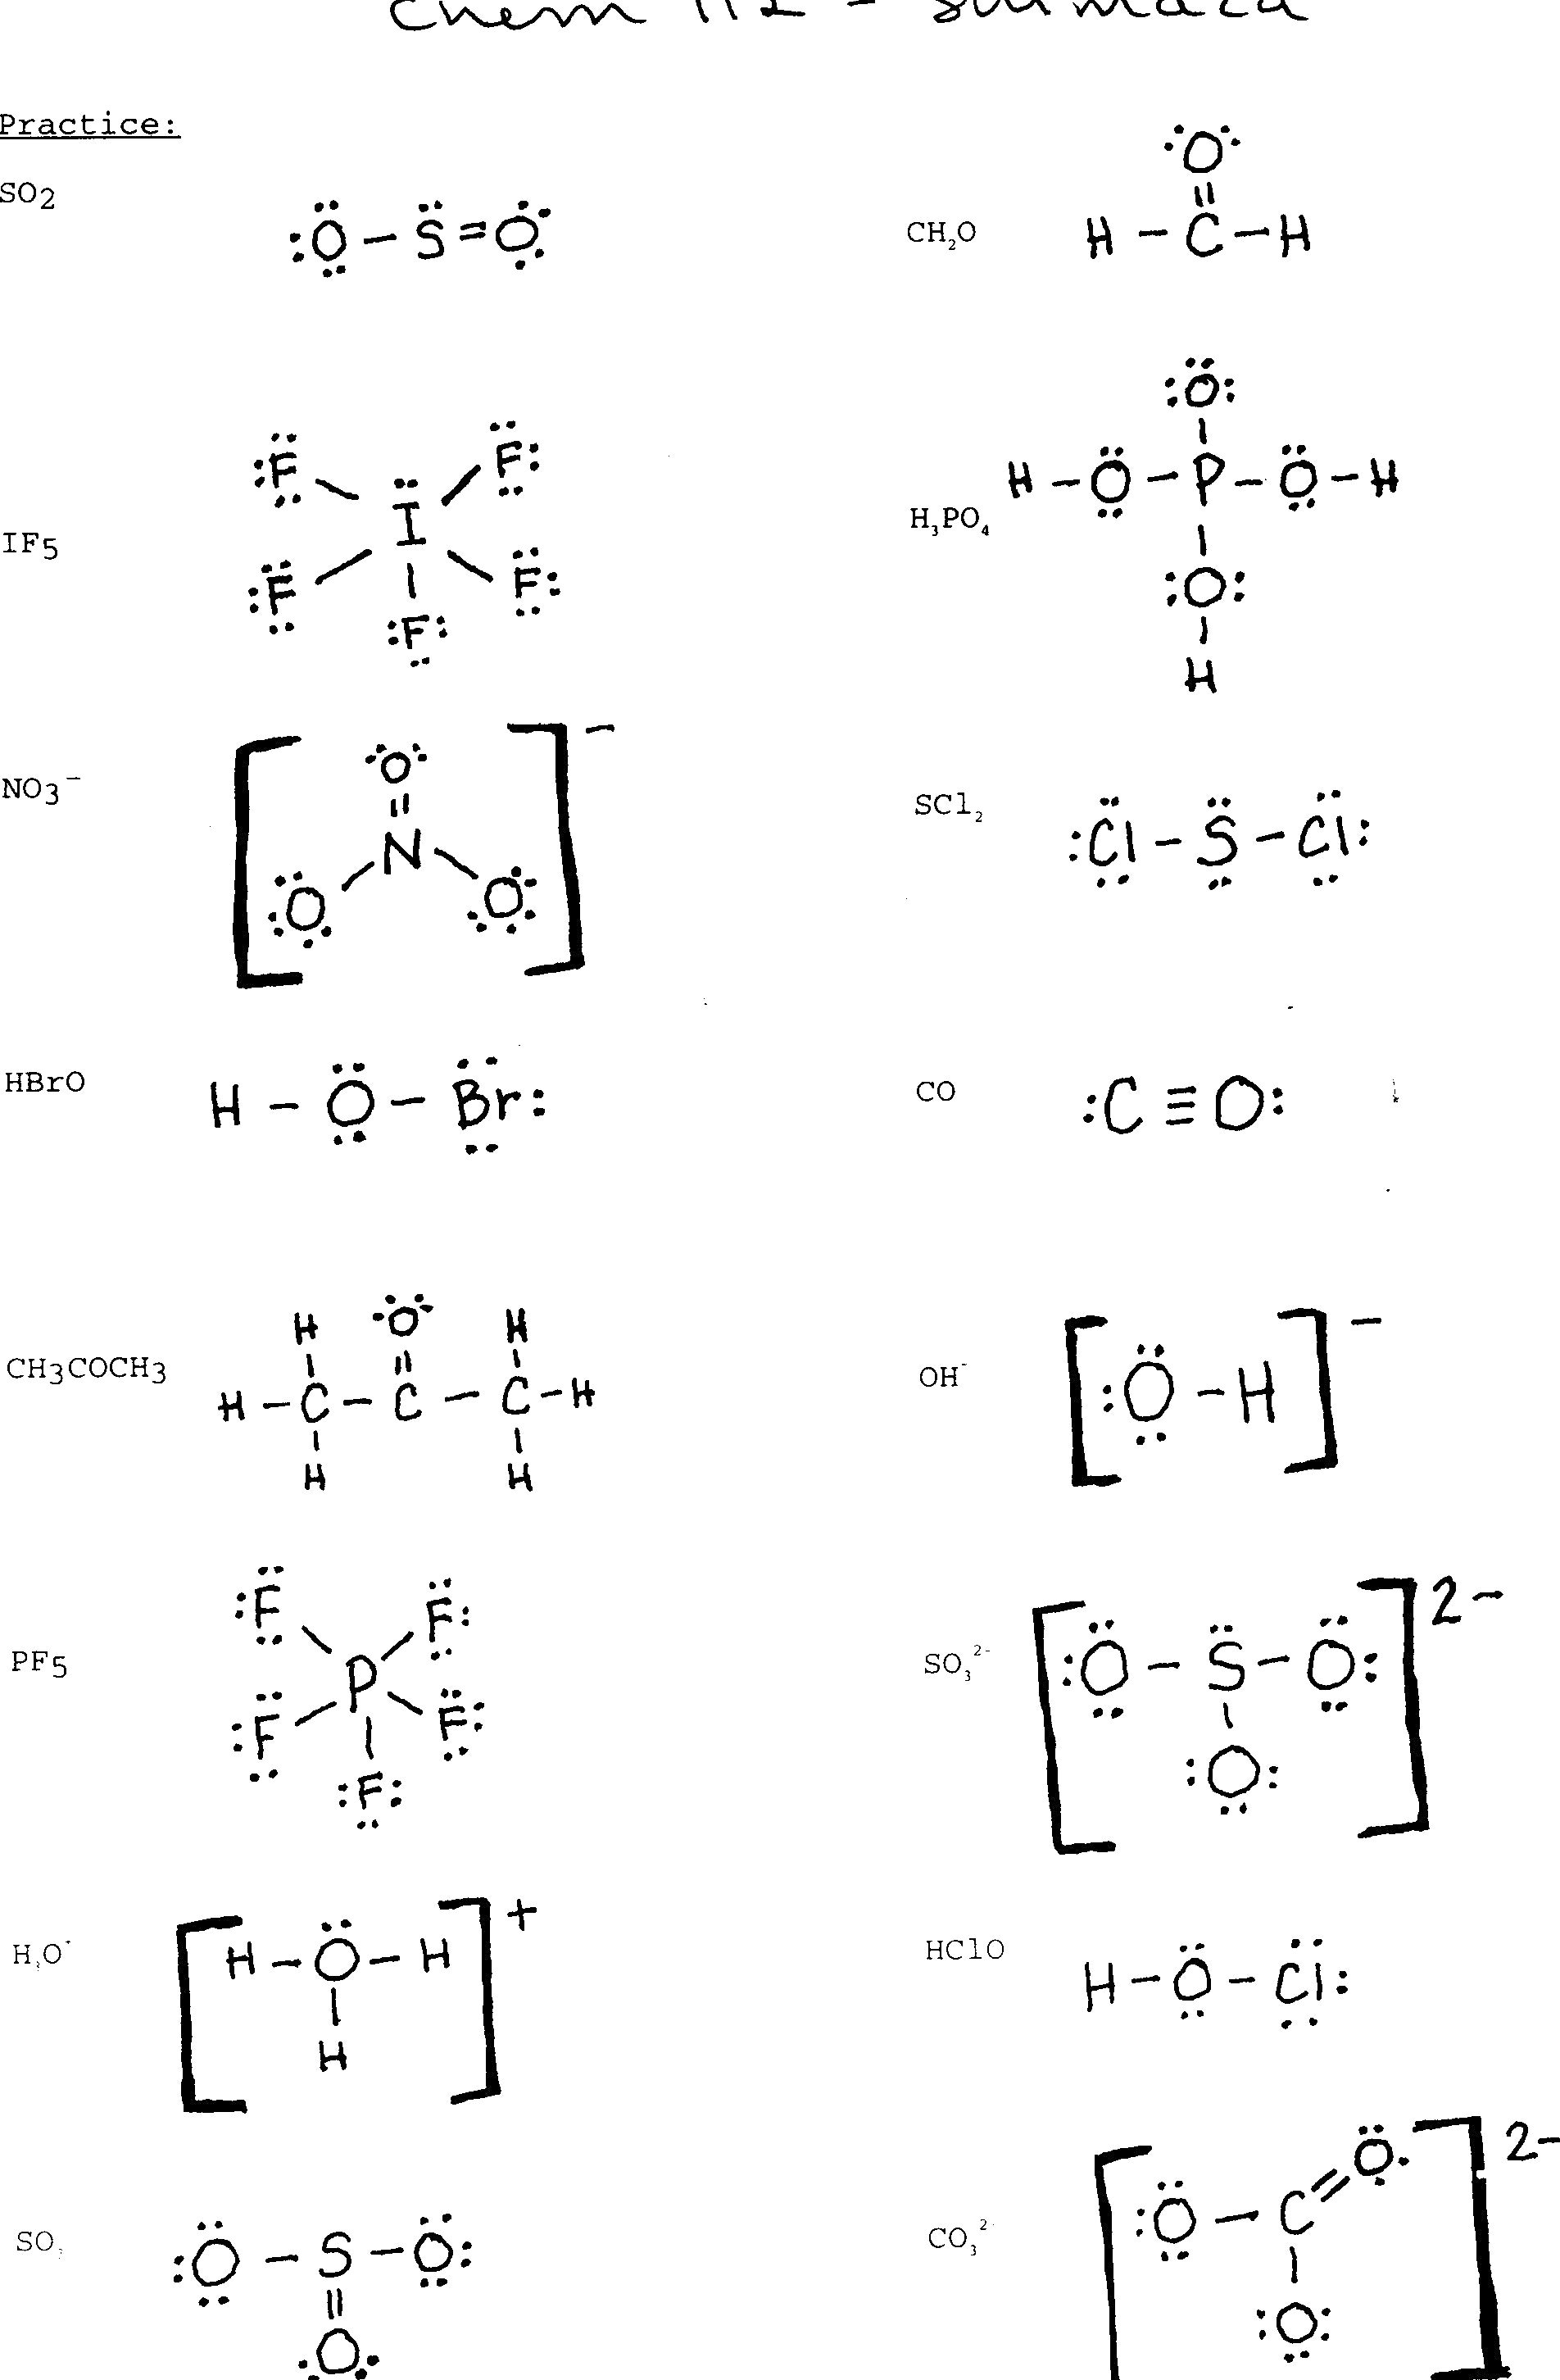 Lewis Structure Worksheet With Answers Algebra Worksheets Pedigree Or Lewis Structure Worksheet 1 Answer Key